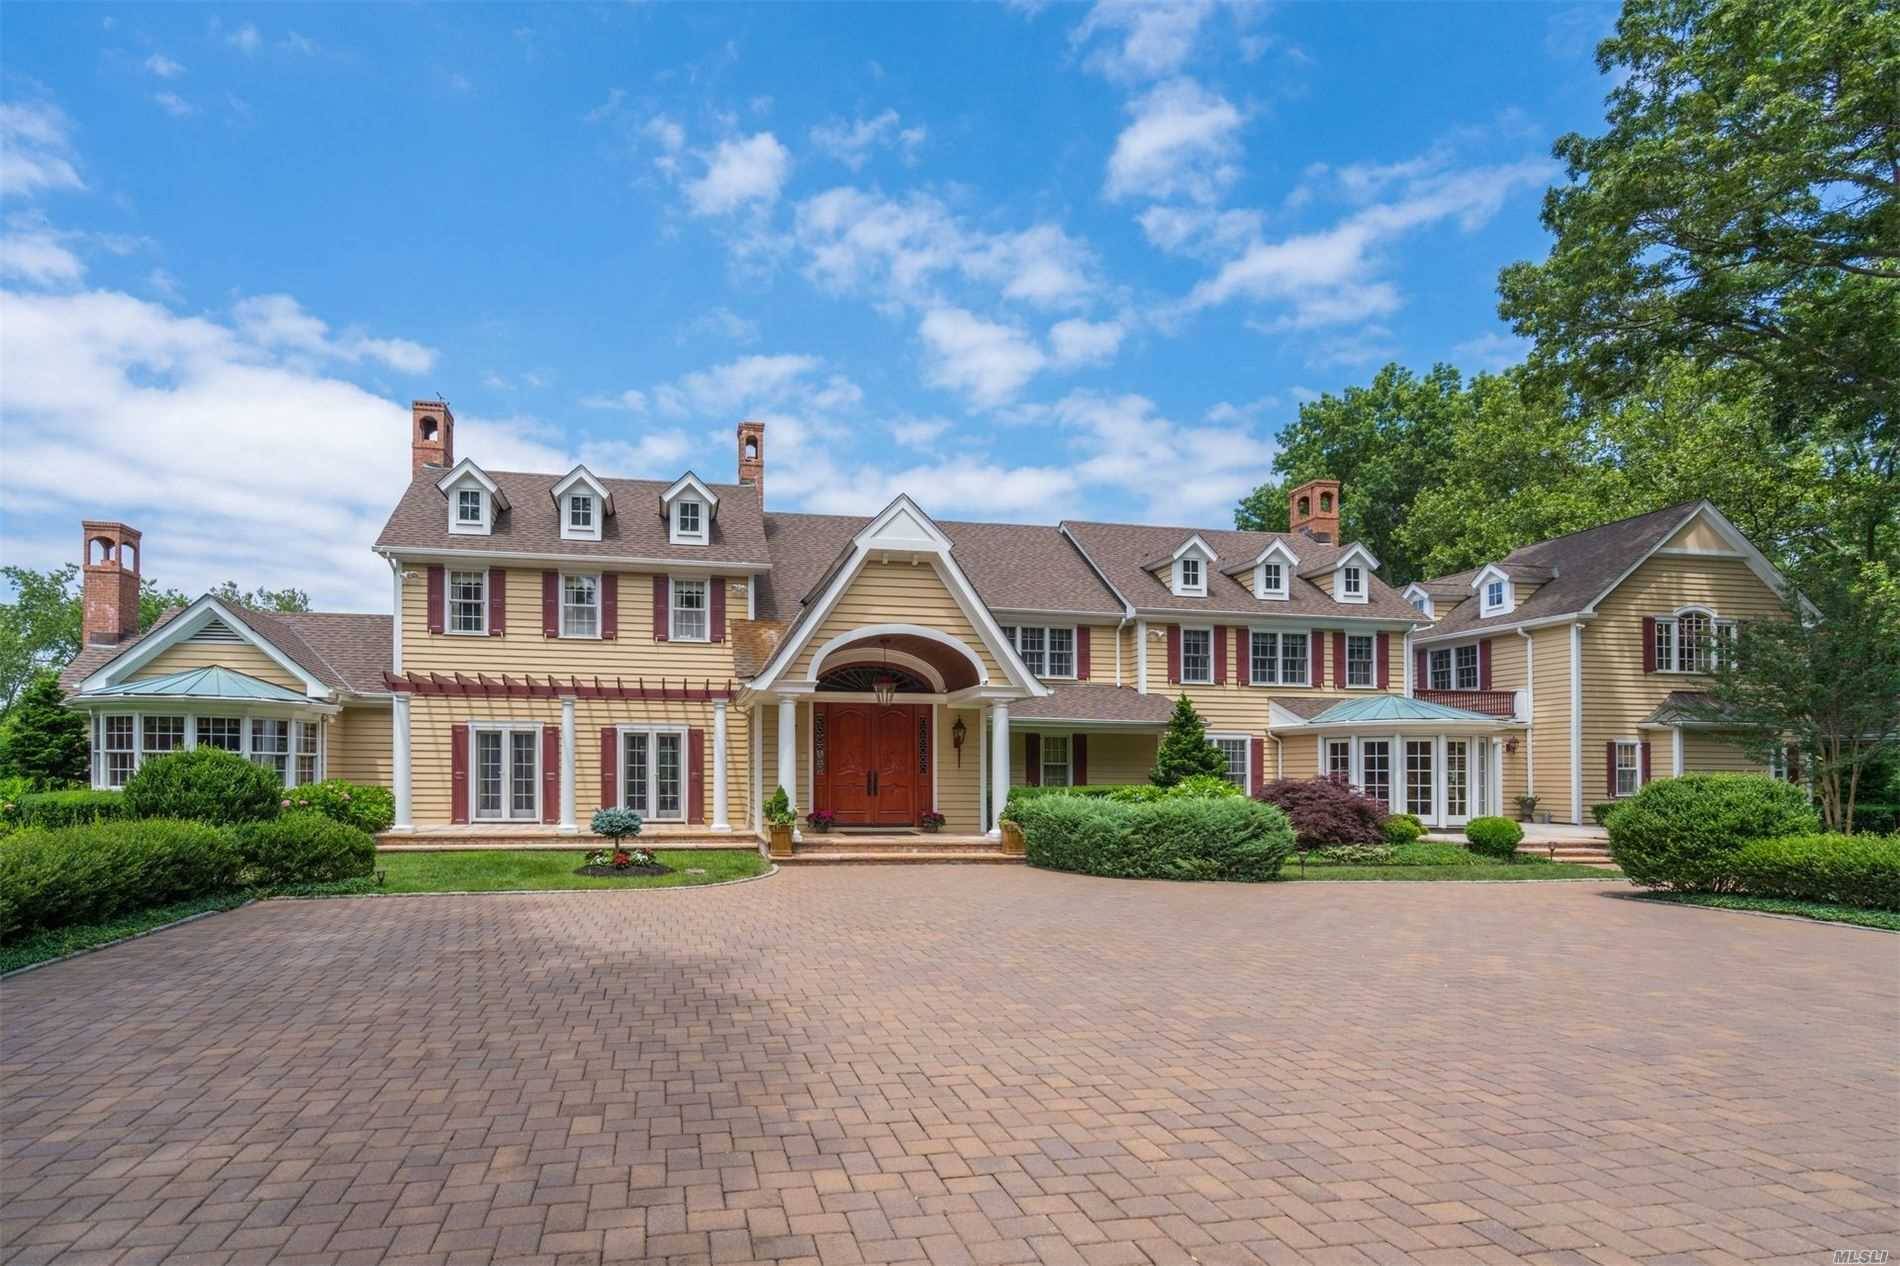 Enjoy Panoramic Sunsets Over The Li Sound From This Fabulous 8 acre Waterfront Estate Complete W Pool, Tennis Ct, and 3 Car Garage W Guest Quarters.